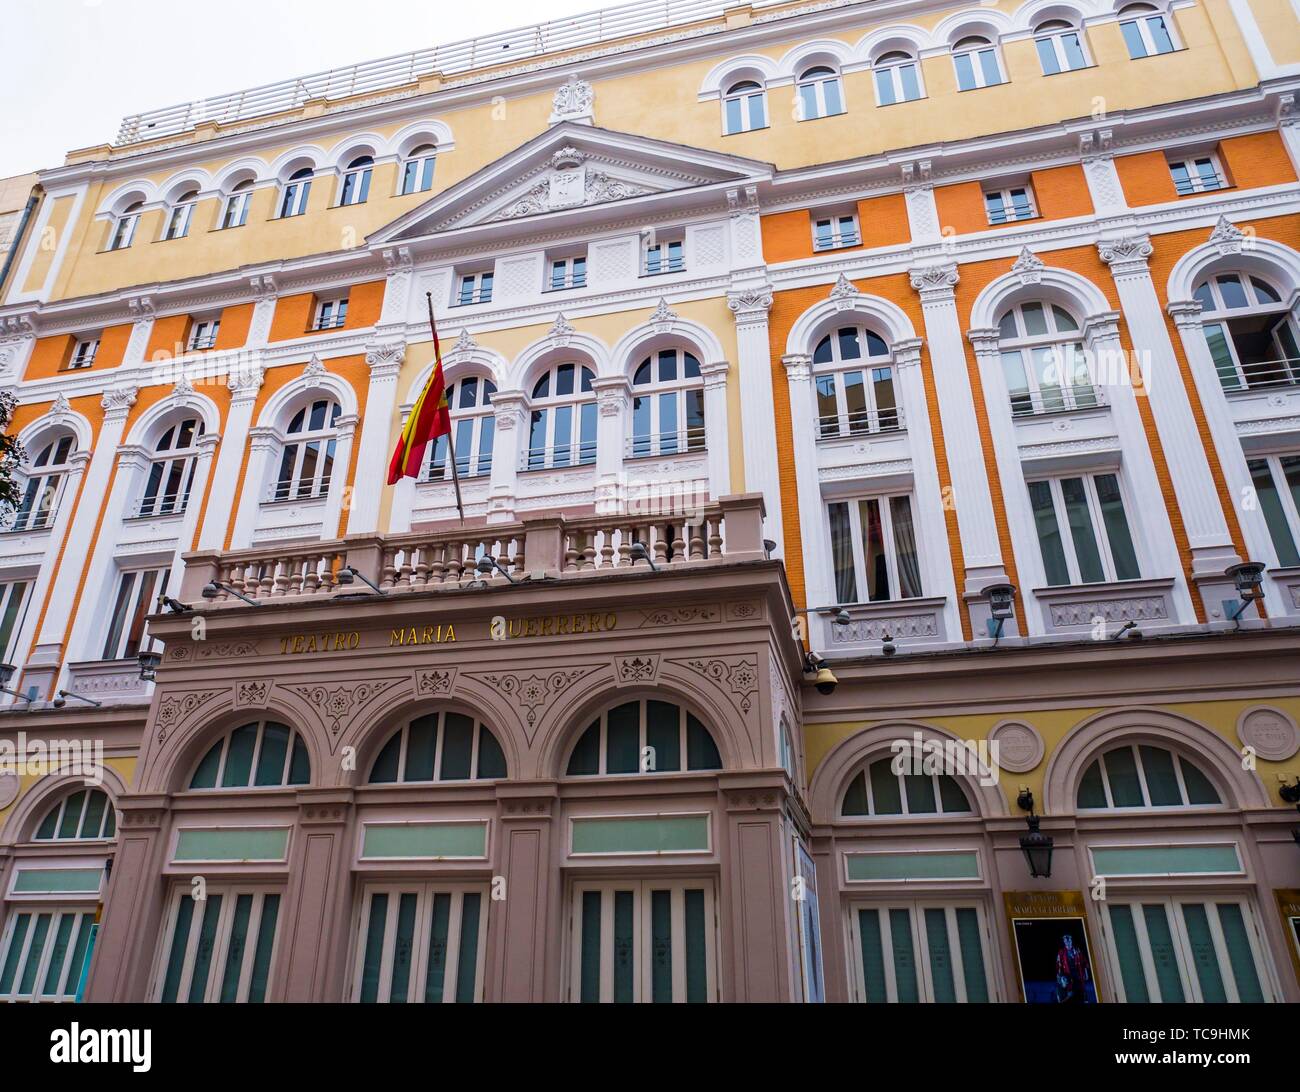 Teatro Maria Guerrero High Resolution Stock Photography and Images - Alamy